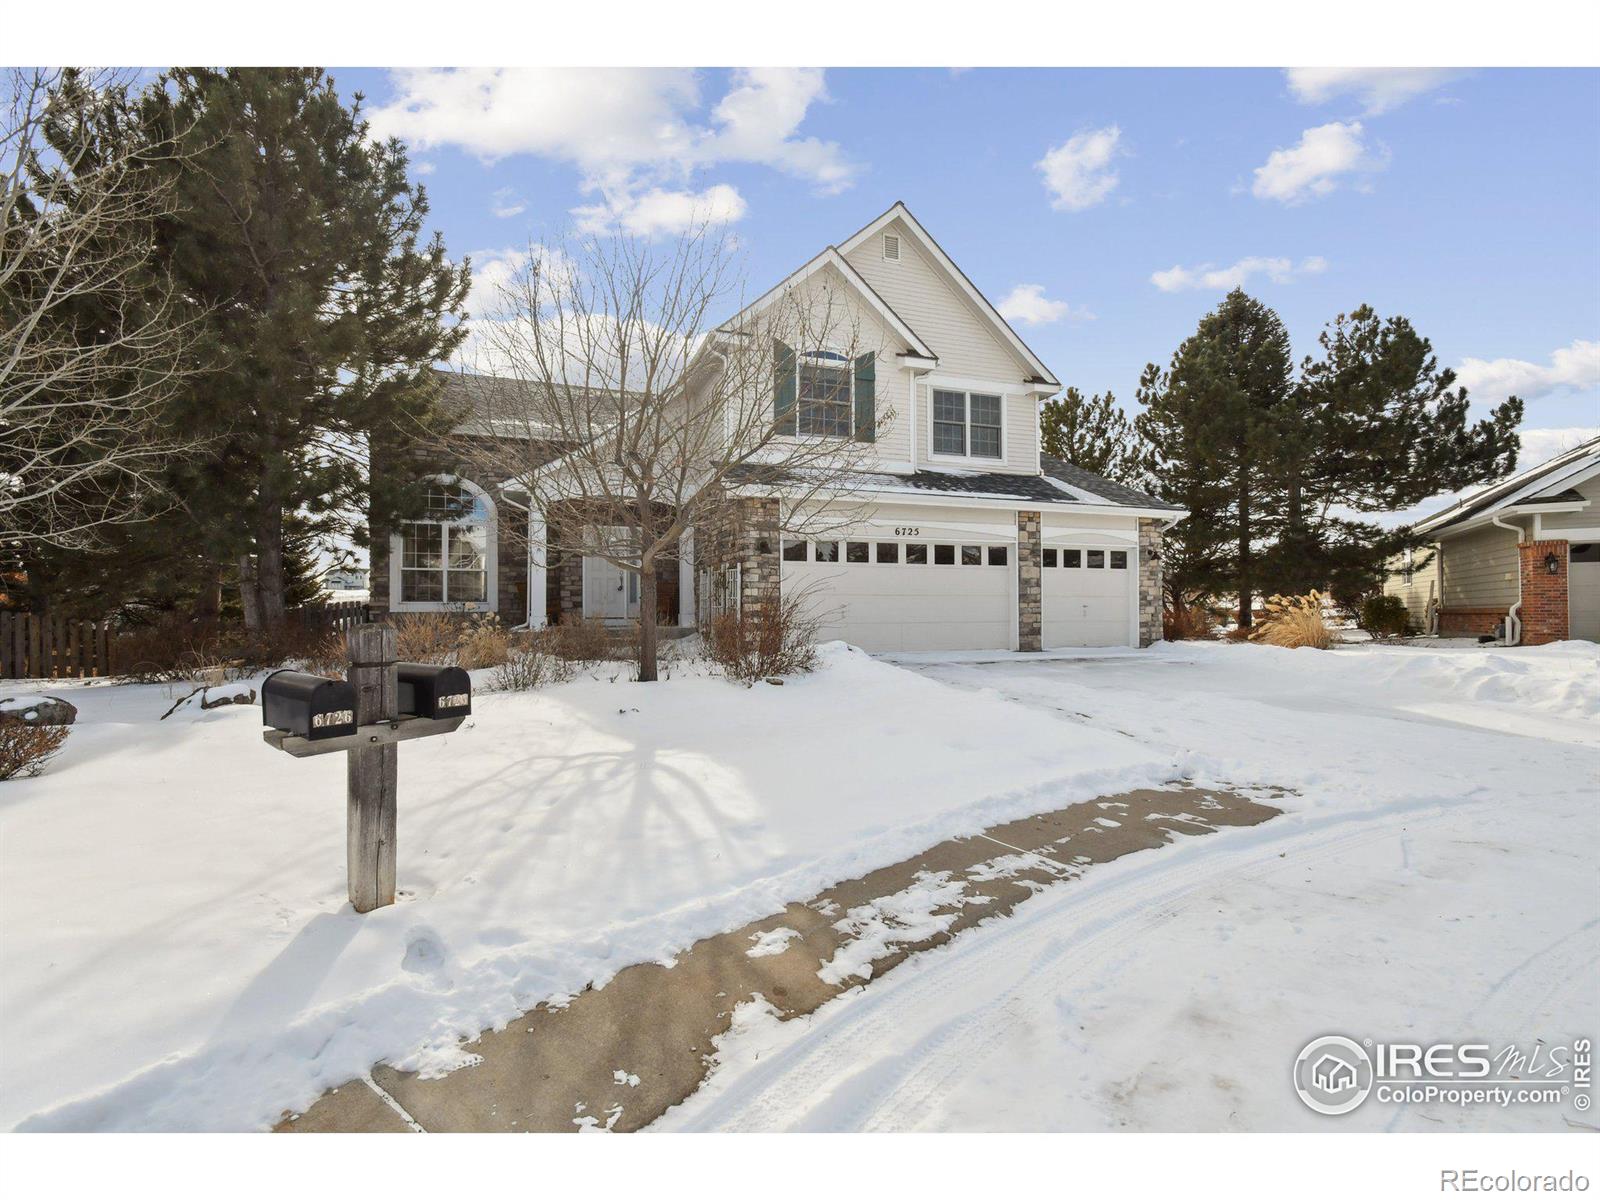 6725  hanley court, Castle Pines sold home. Closed on 2024-03-26 for $925,000.